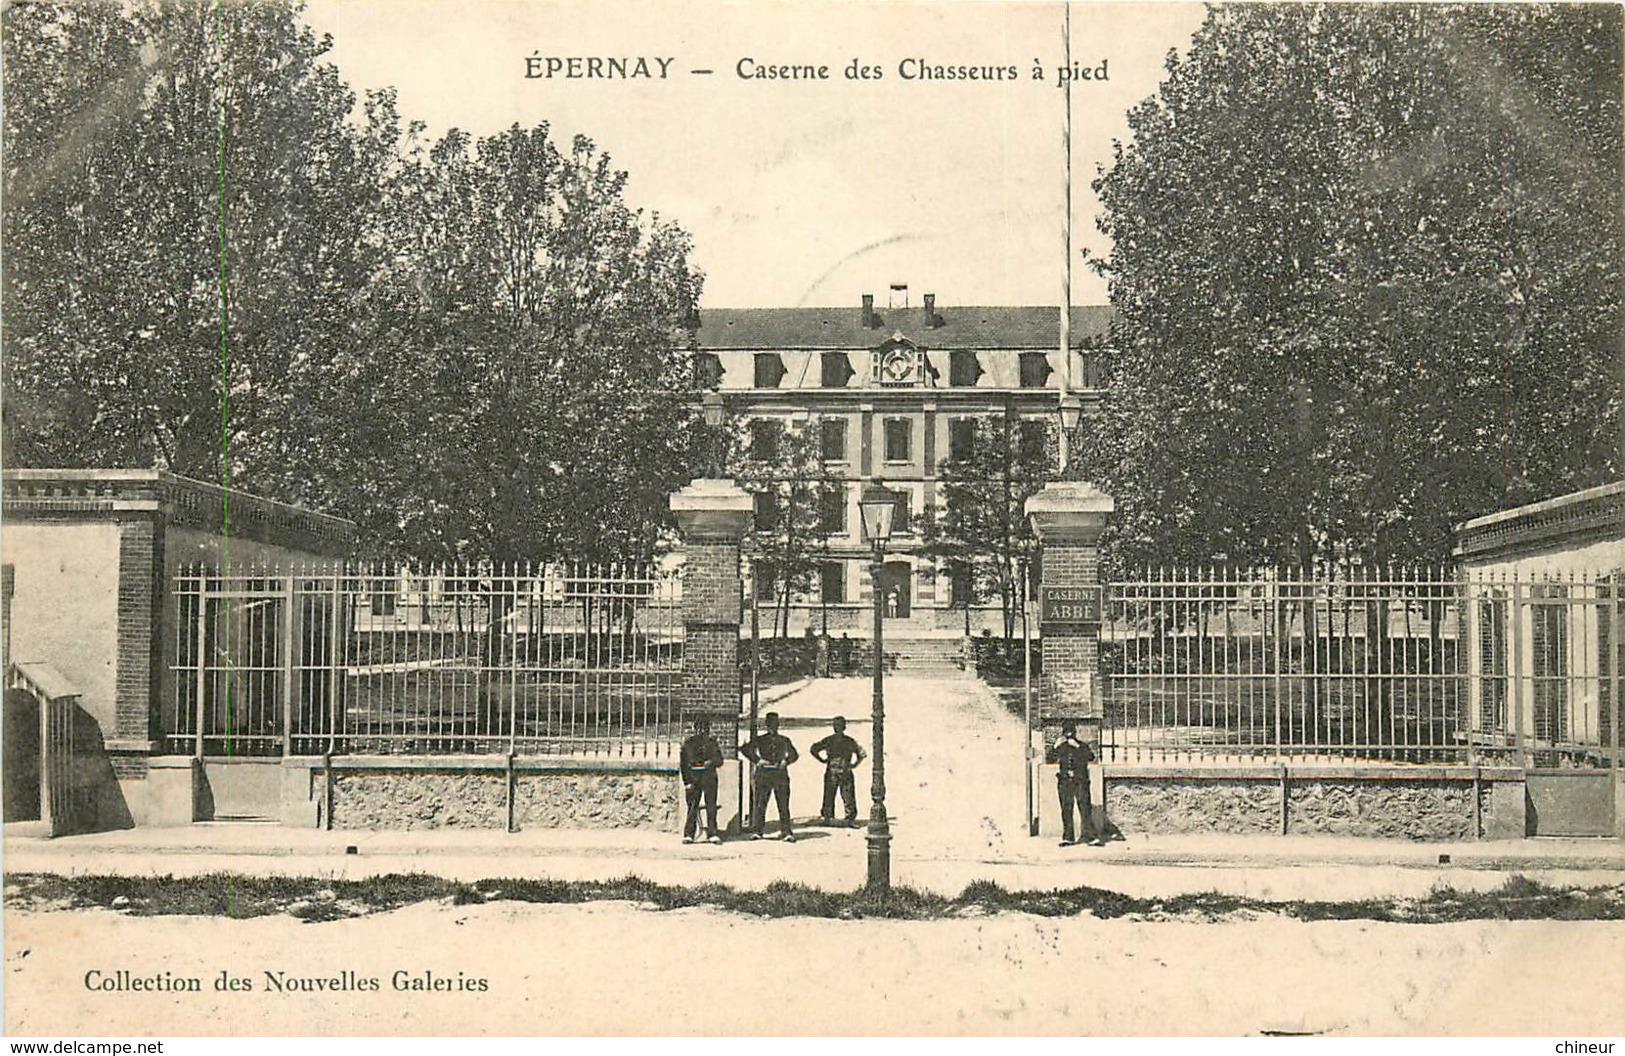 EPERNAY CASERNE DES CHASSEURS A PIED - Epernay